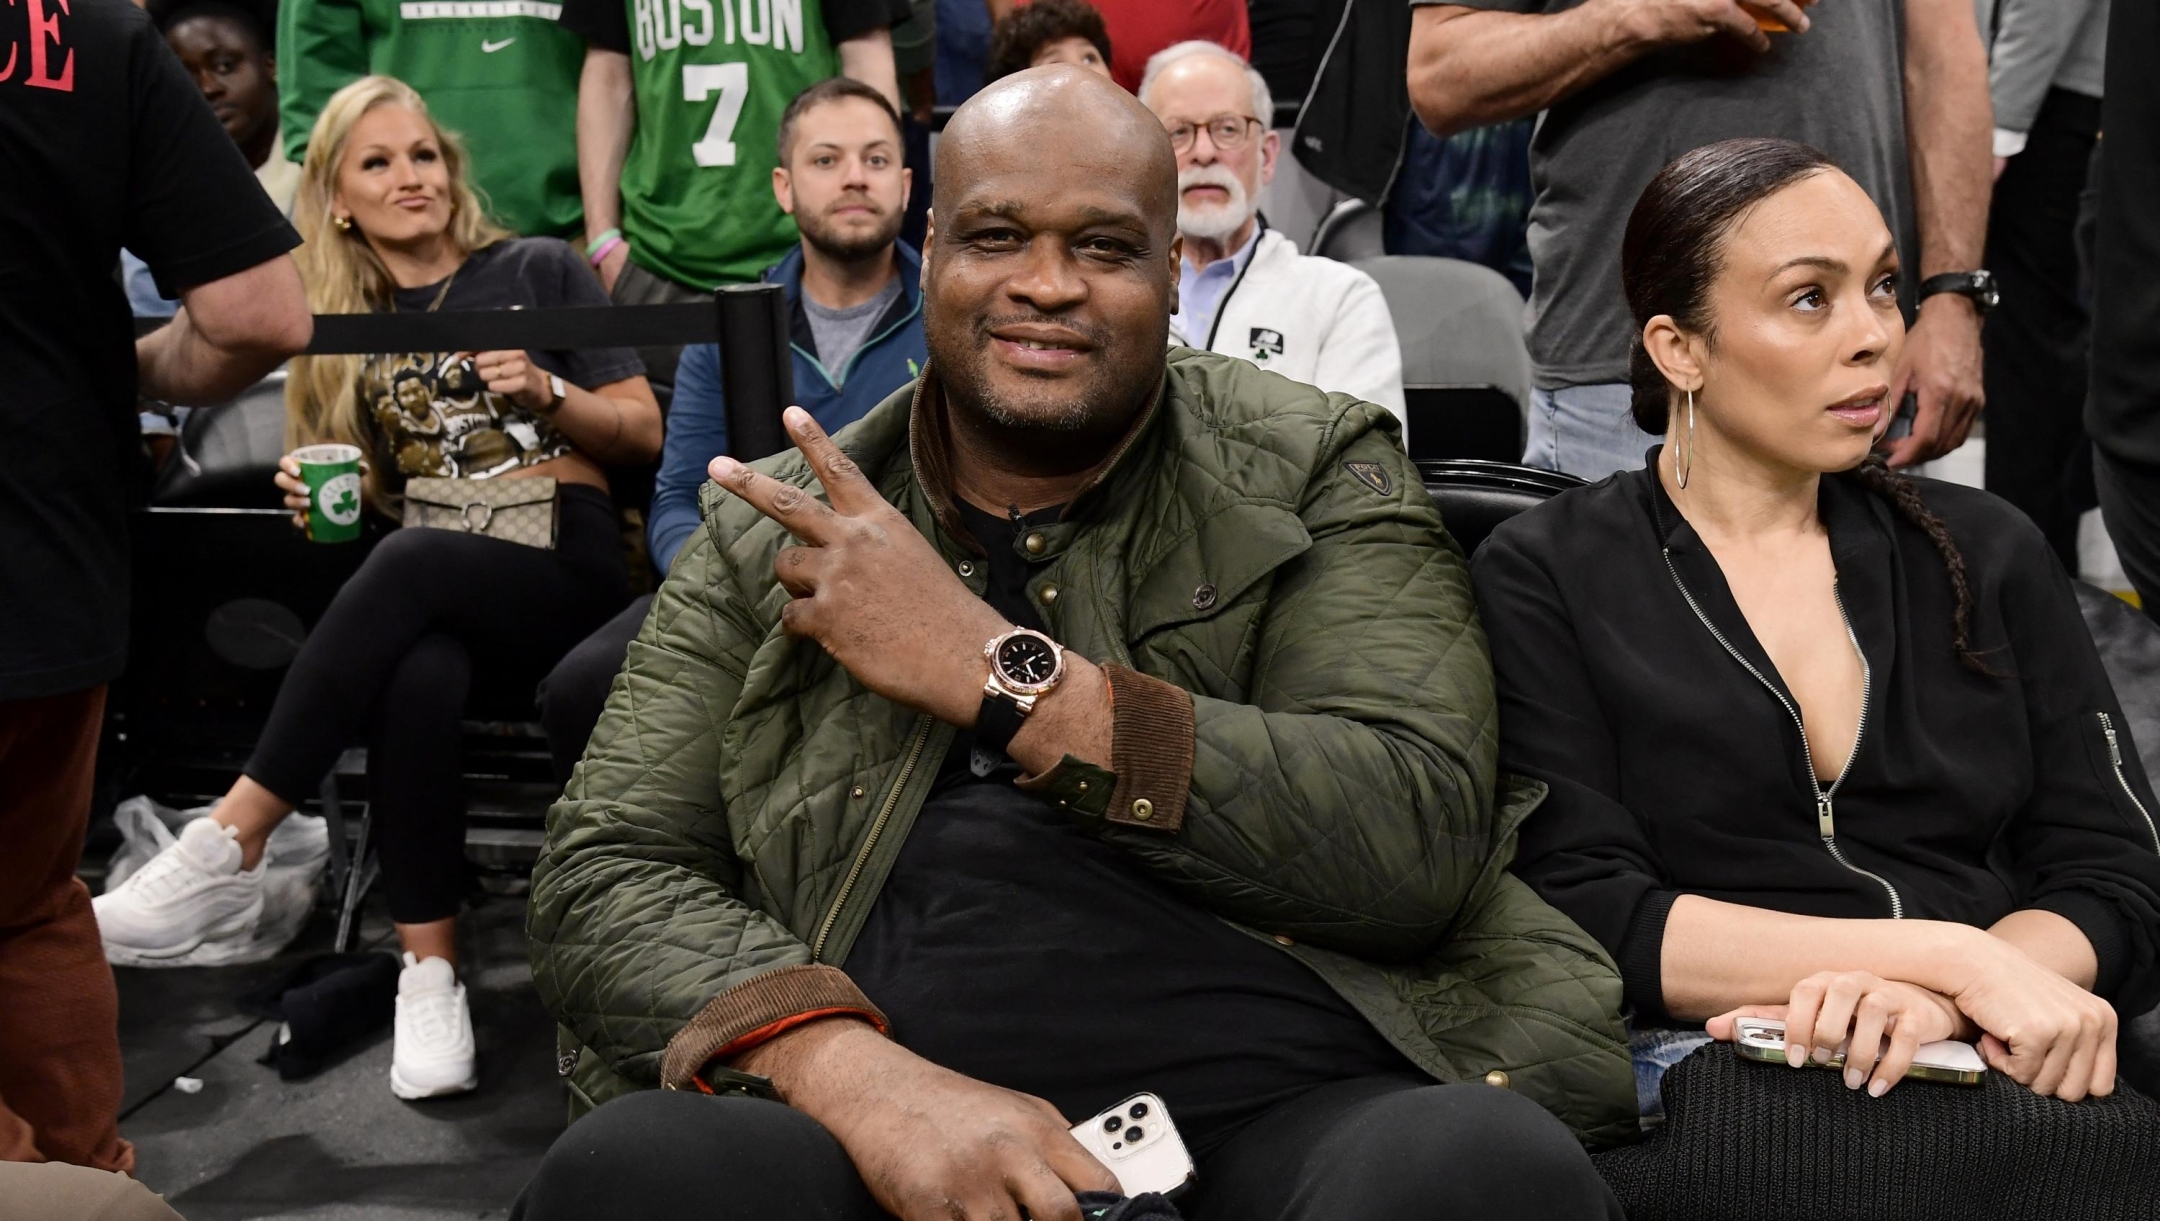 BOSTON, MA - MAY 19: Antoine Walker attends Game 2 of the 2023 NBA Playoffs Eastern Conference Finals between the Miami Heat and Boston Celtics on May 19, 2023 at the TD Garden in Boston, Massachusetts. NOTE TO USER: User expressly acknowledges and agrees that, by downloading and or using this photograph, User is consenting to the terms and conditions of the Getty Images License Agreement. Mandatory Copyright Notice: Copyright 2023 NBAE   Brian Babineau/NBAE via Getty Images/AFP (Photo by Brian Babineau / NBAE / Getty Images / Getty Images via AFP)